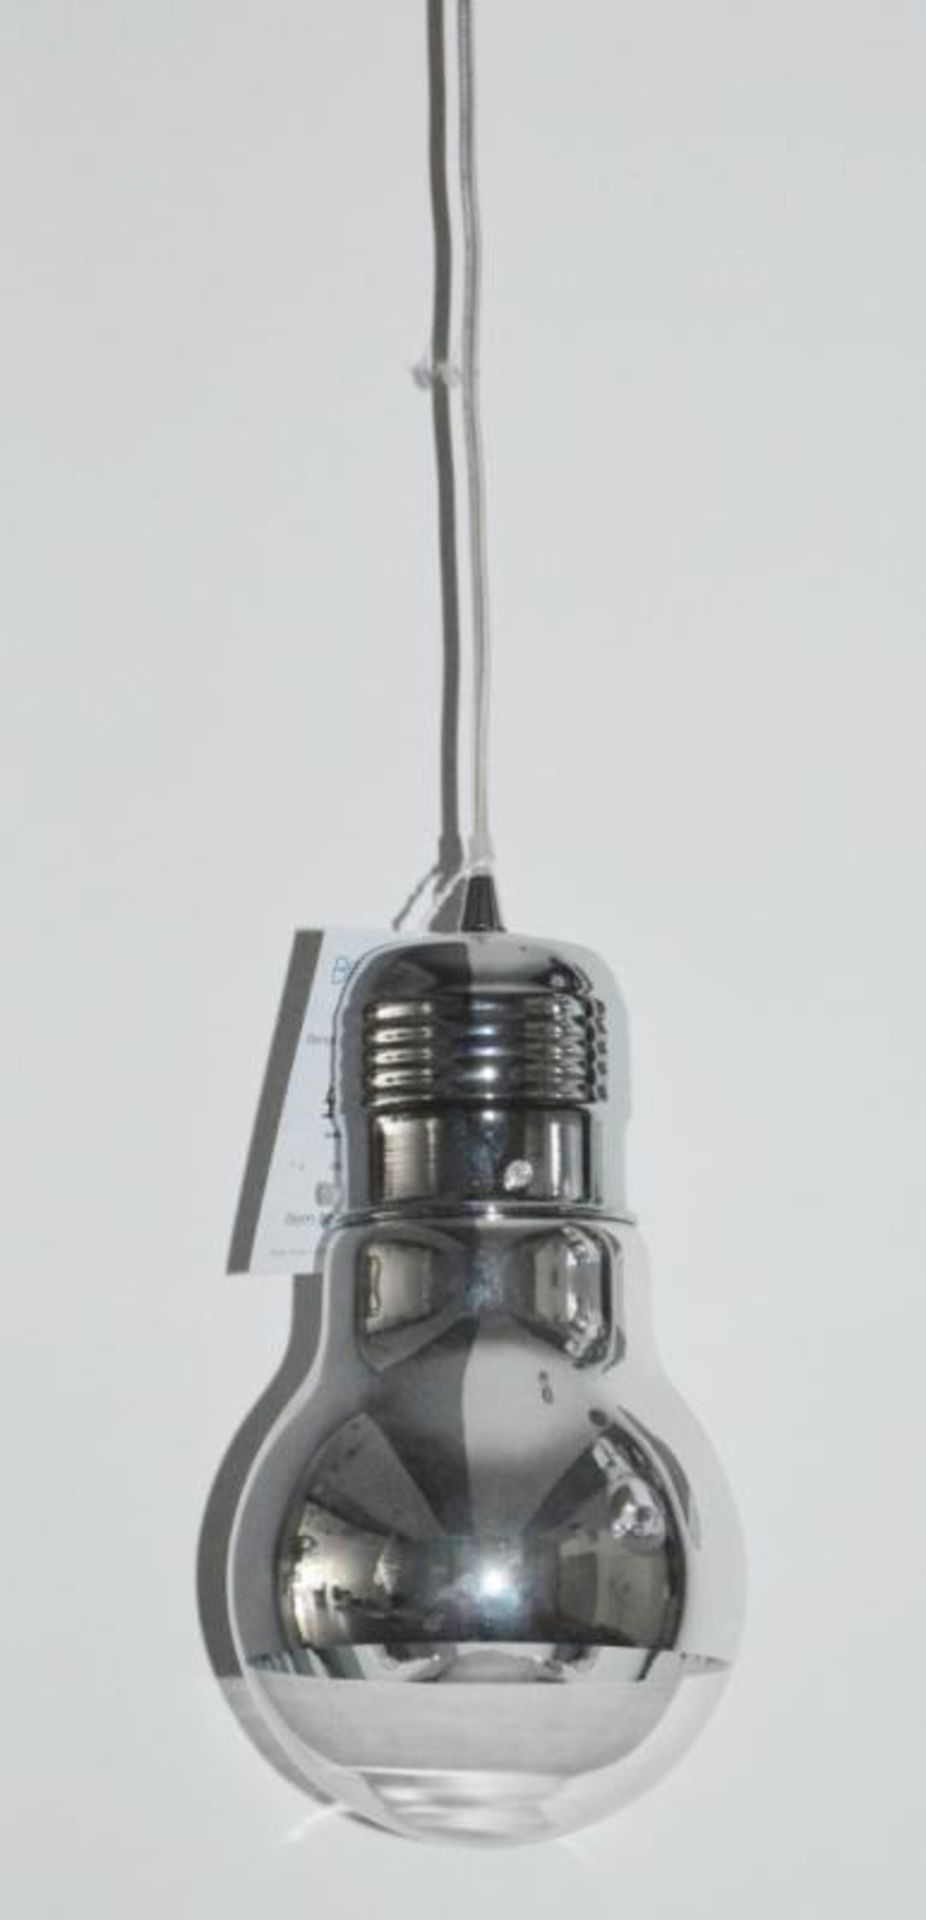 1 x Neo Chrome Large Bulb Pendant Light With Mirrored Clear Glass Shade - Adjustable Height - Quirky - Image 2 of 3